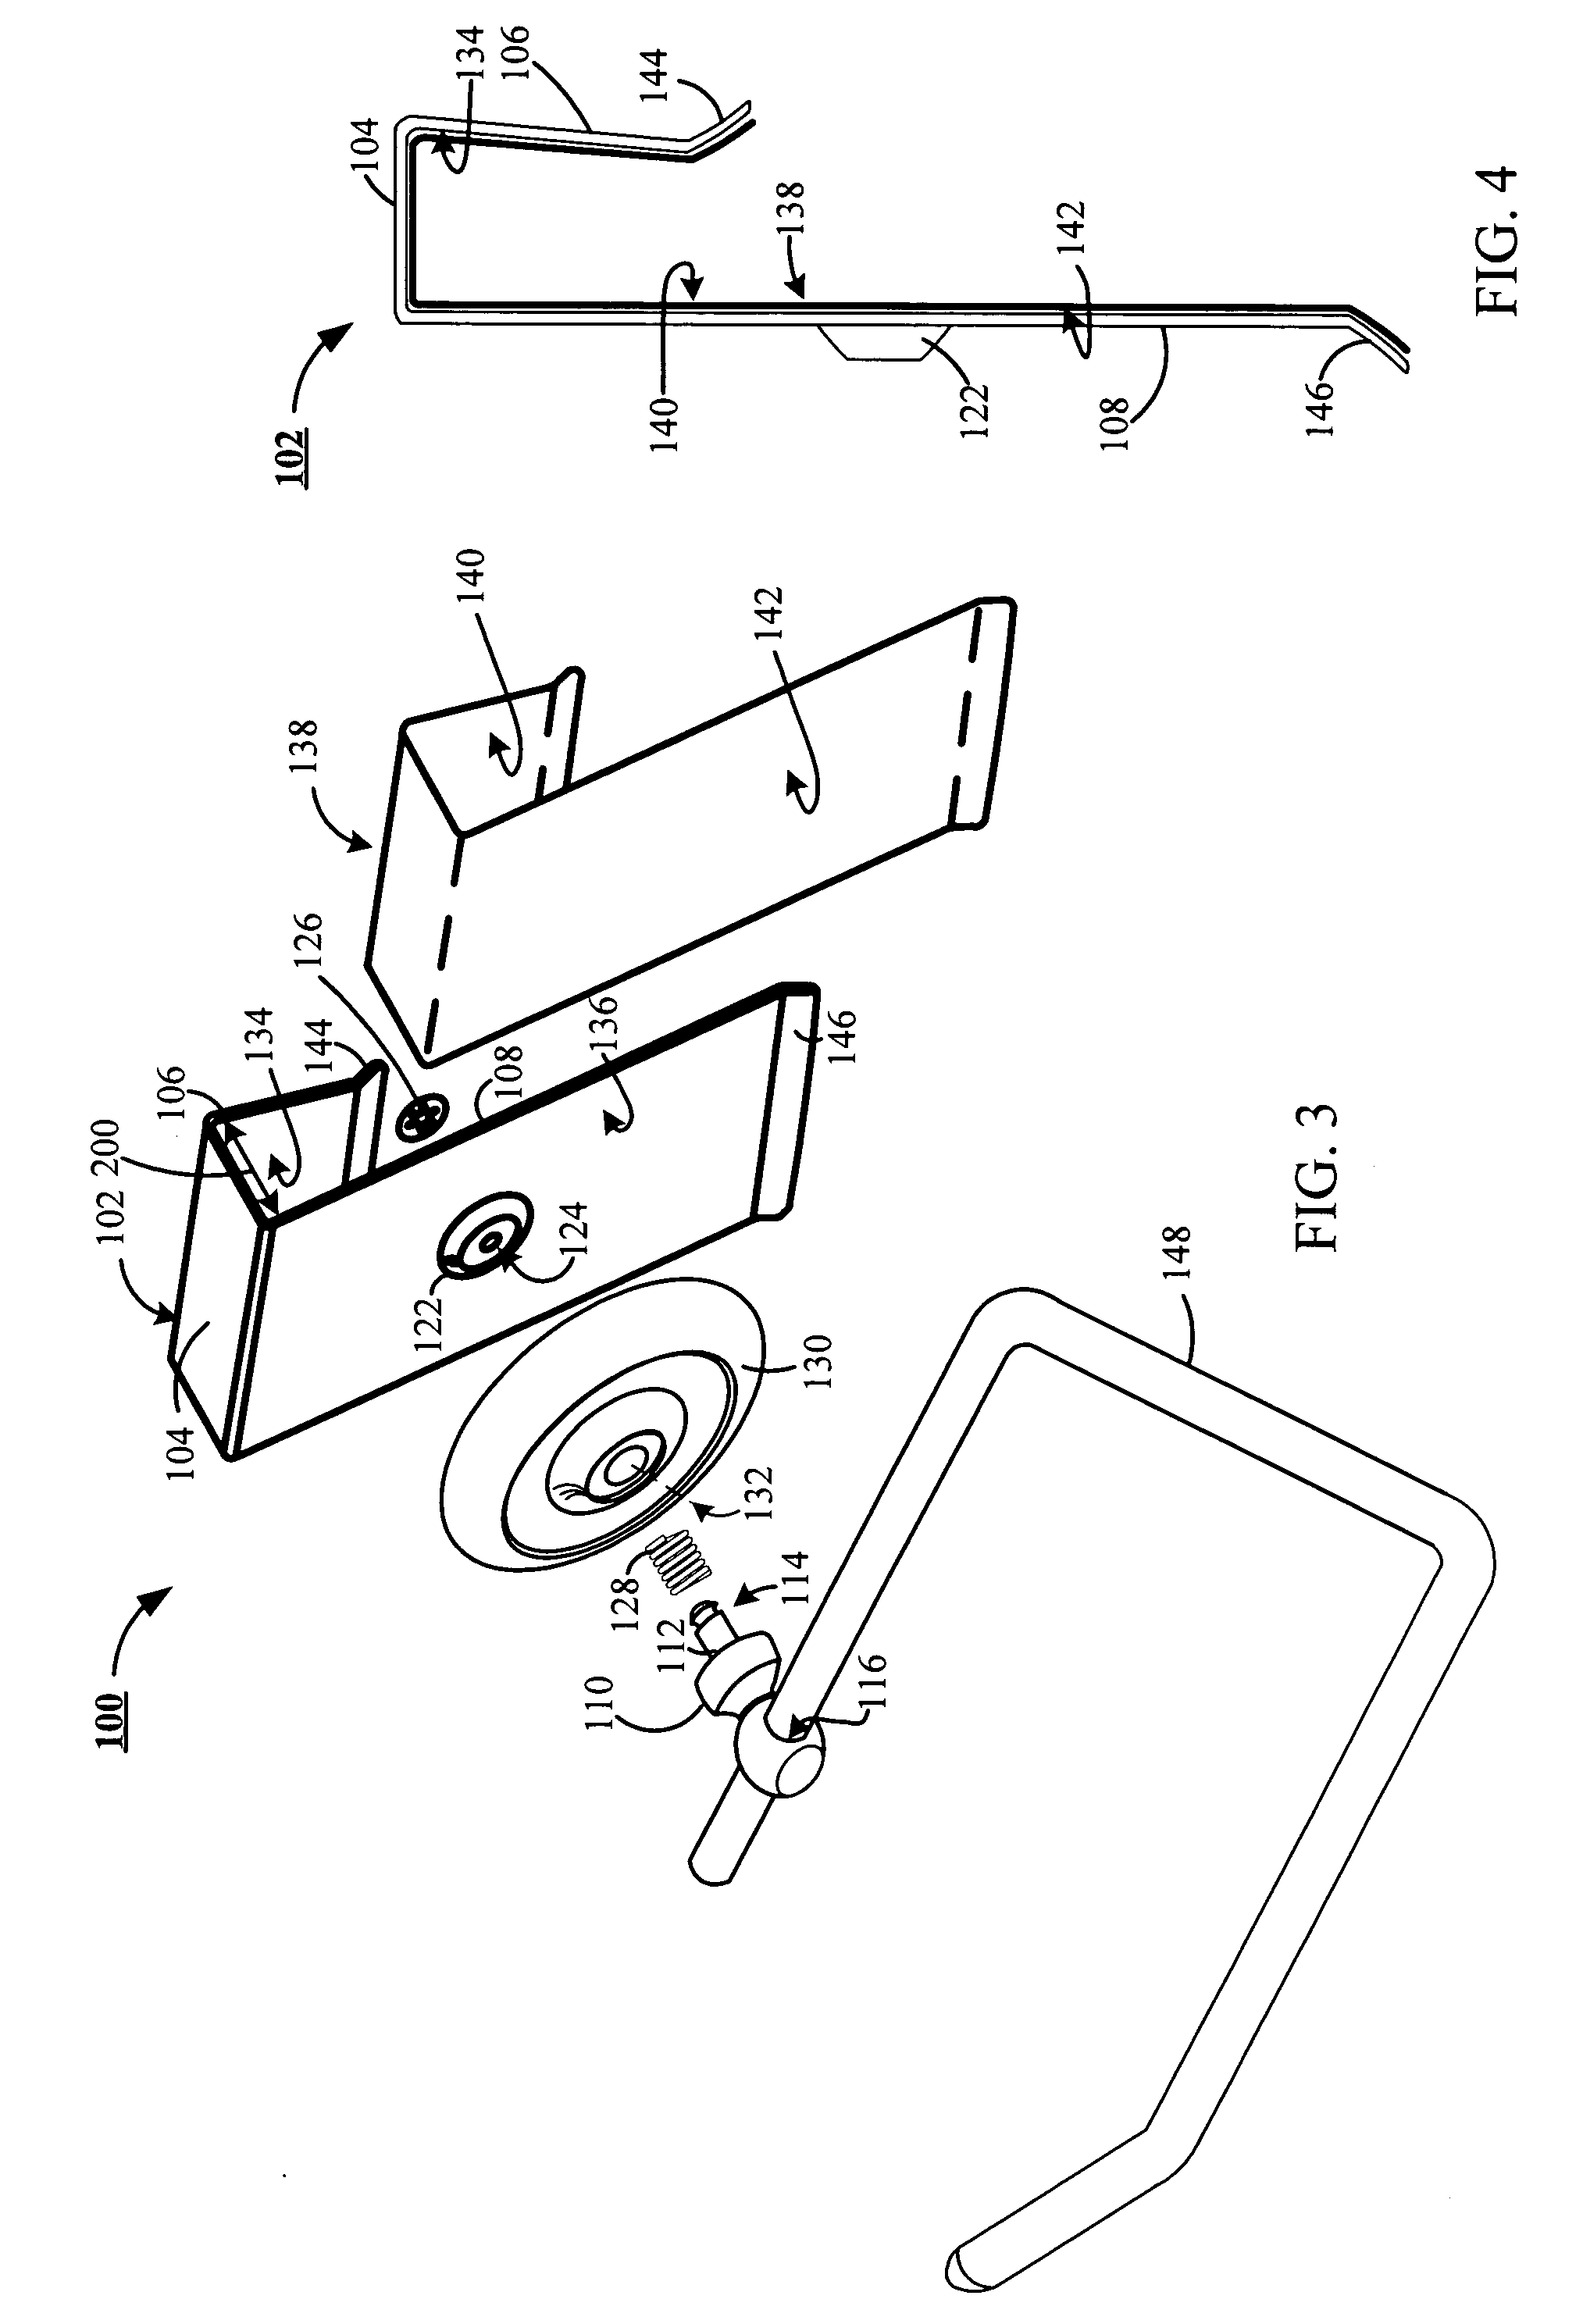 Portable article support apparatus